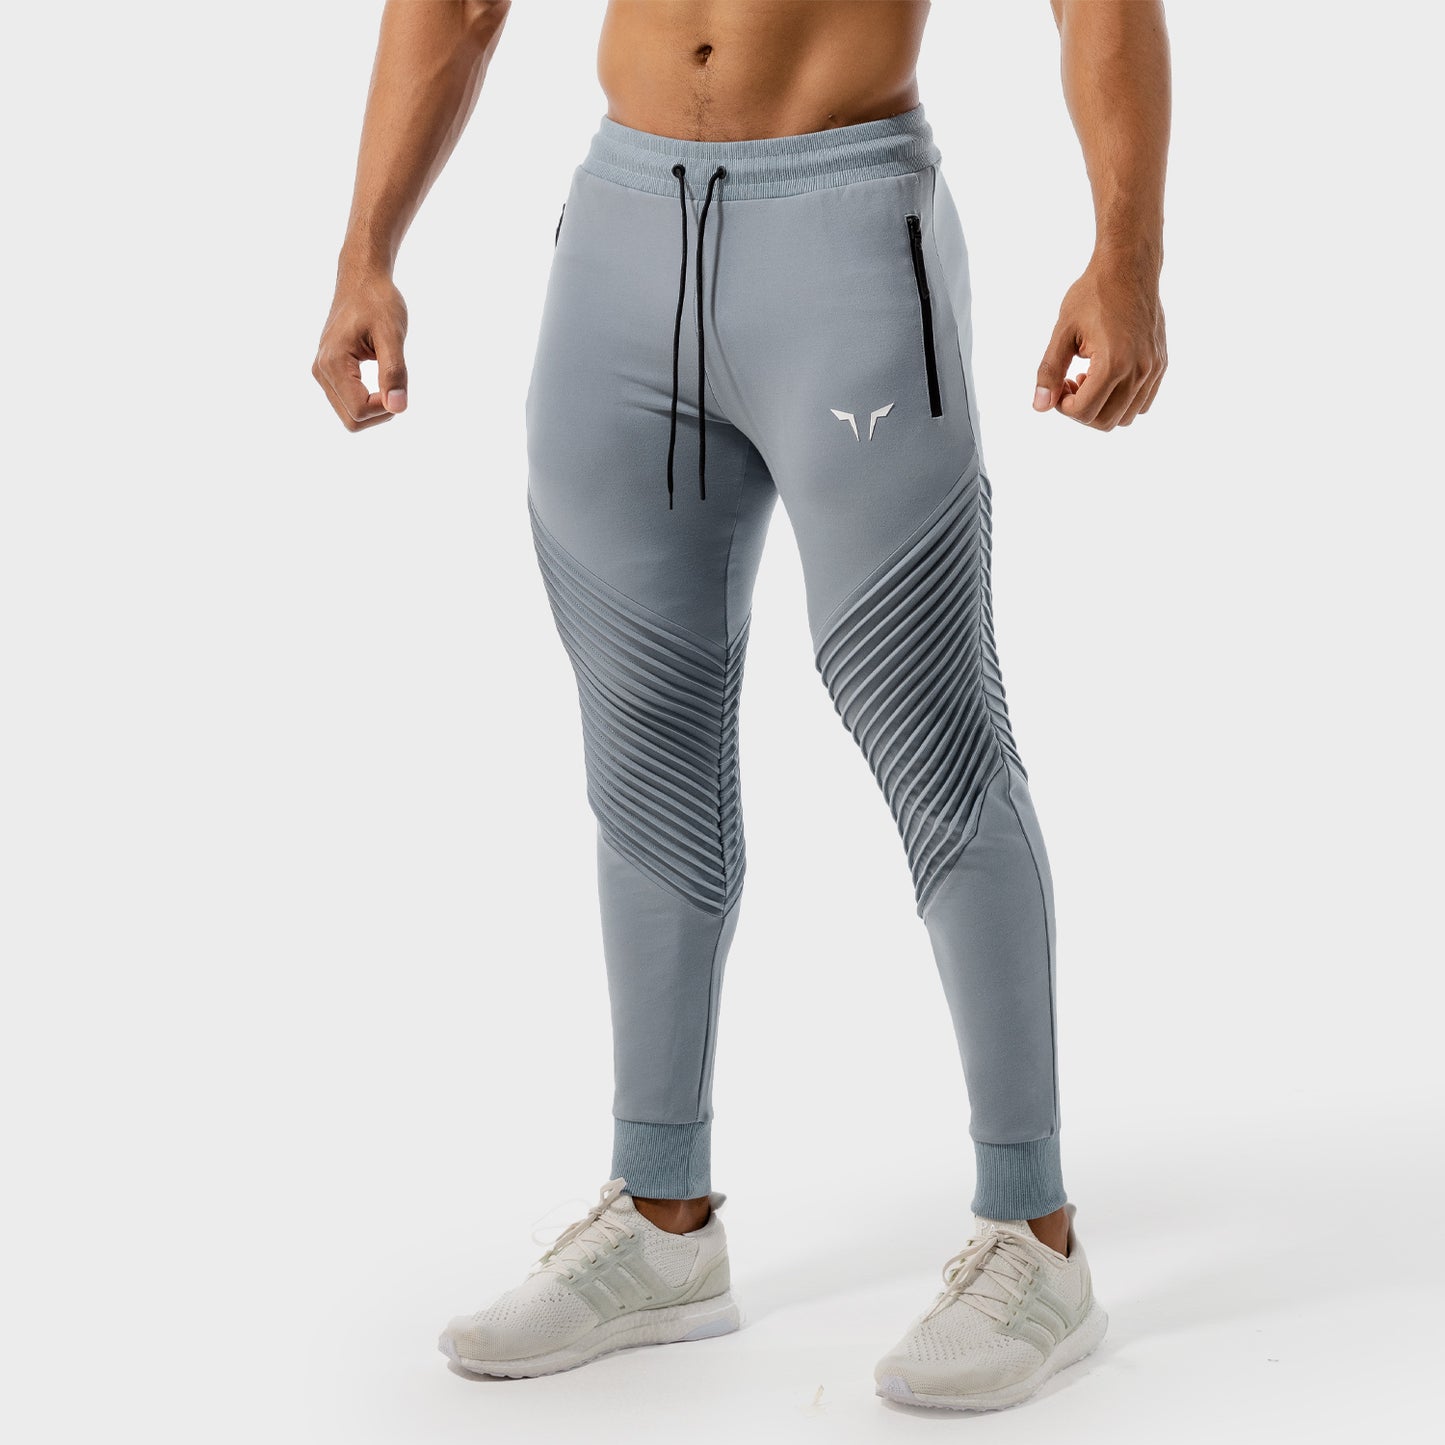 squatwolf-workout-pants-for-men-statement-ribbed-joggers-blue-gym-wear